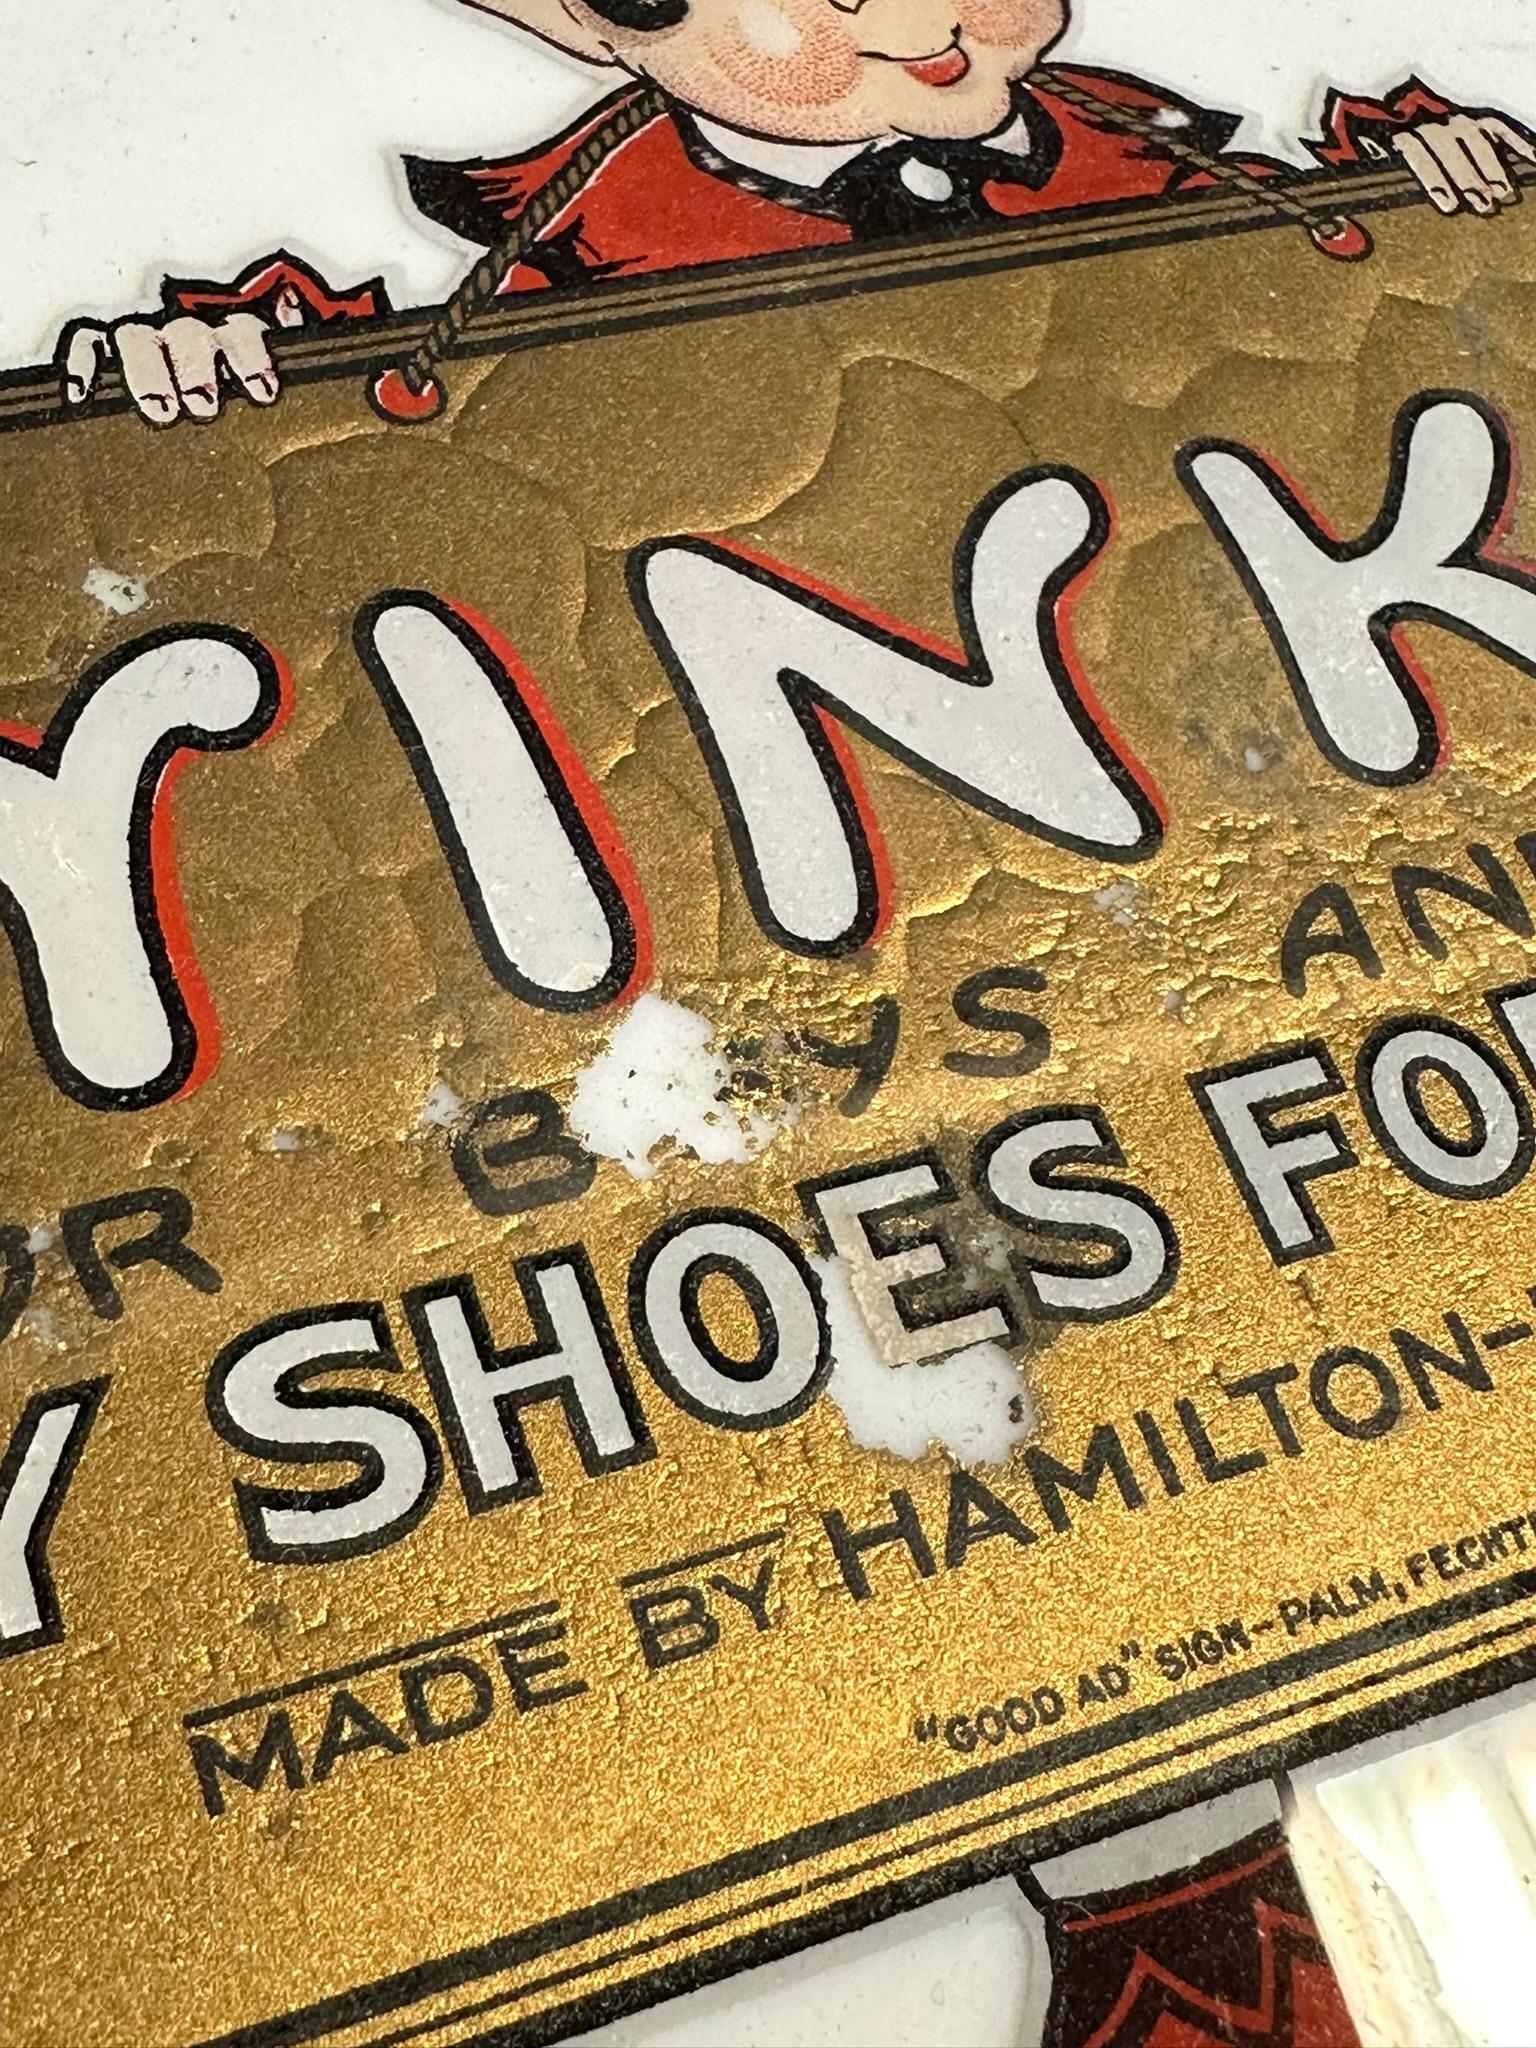 Original Early 1900s Twinkies For Boys & Girls Happy Shoes Milk Glass Advertising Sign w/ Cupie